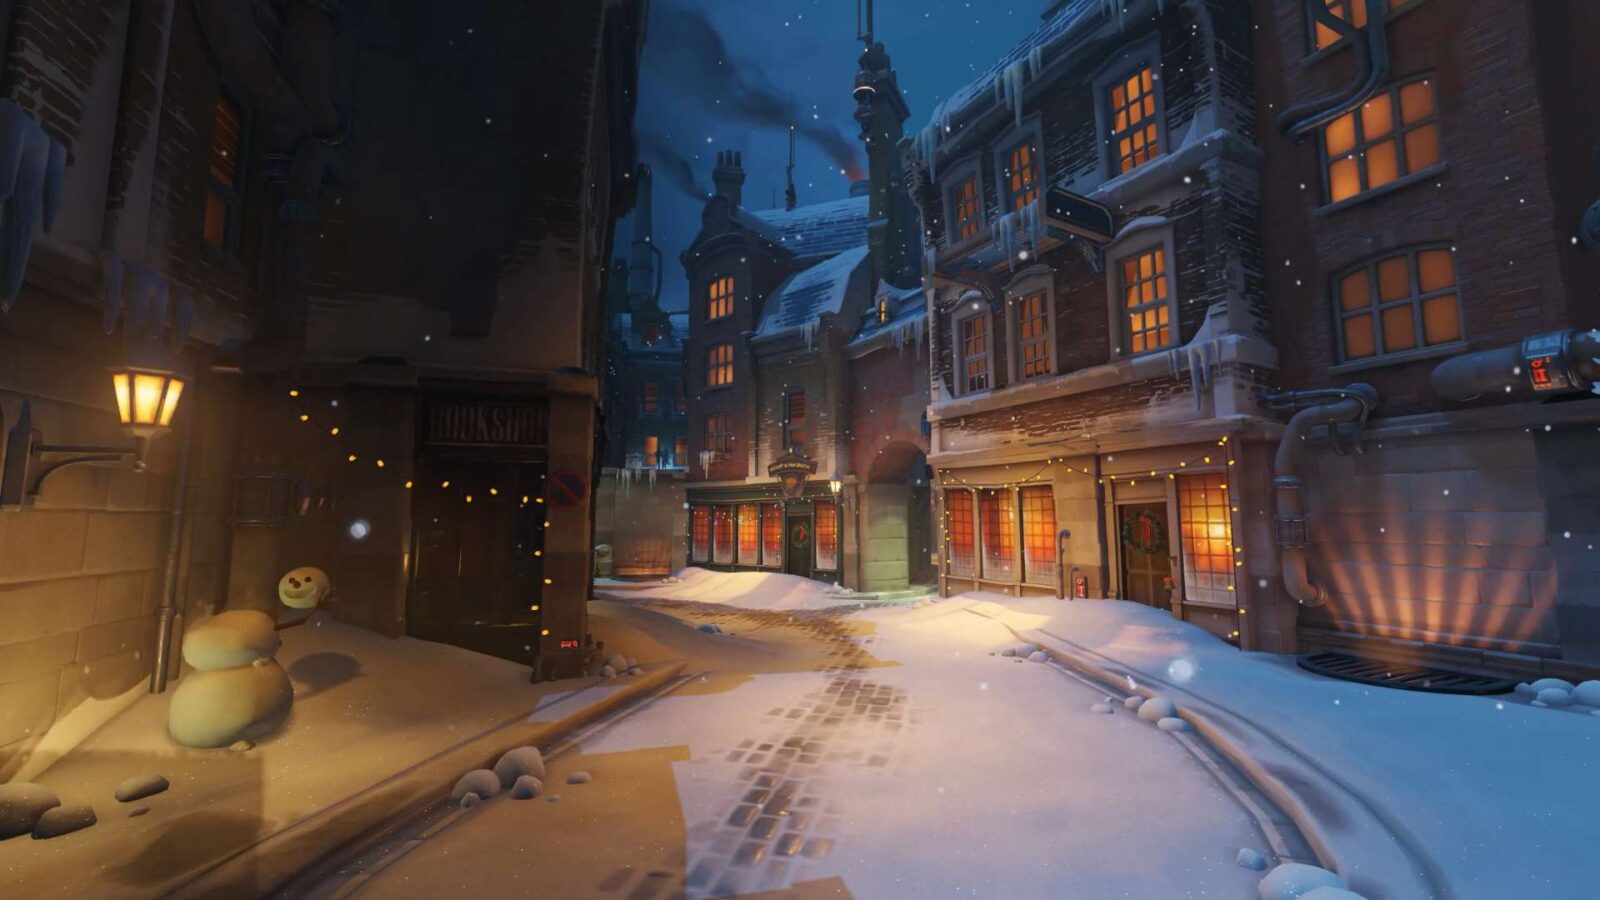 LiveWallpapers4Free.com | King's Row Christmas Overwatch Game - Free Live Wallpaper